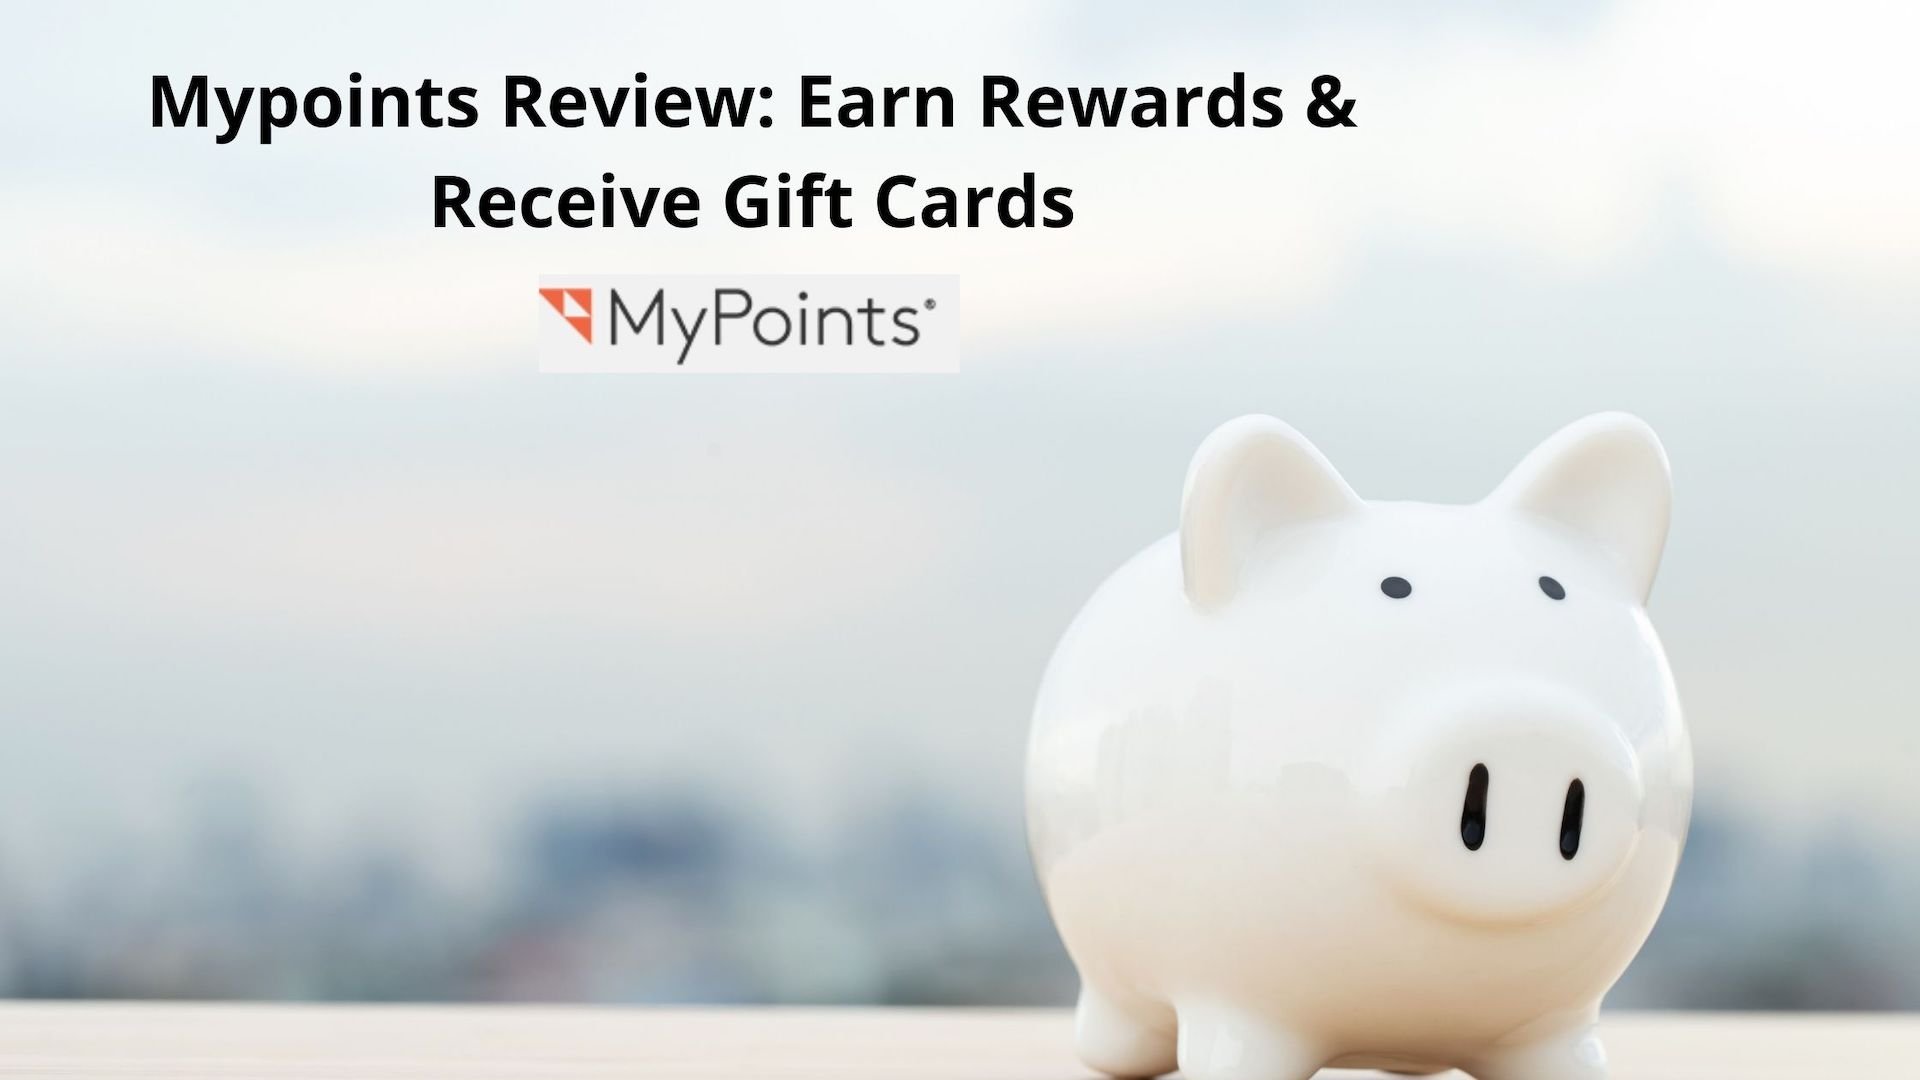 Mypoints Review: Earn Rewards & Receive Gift Cards